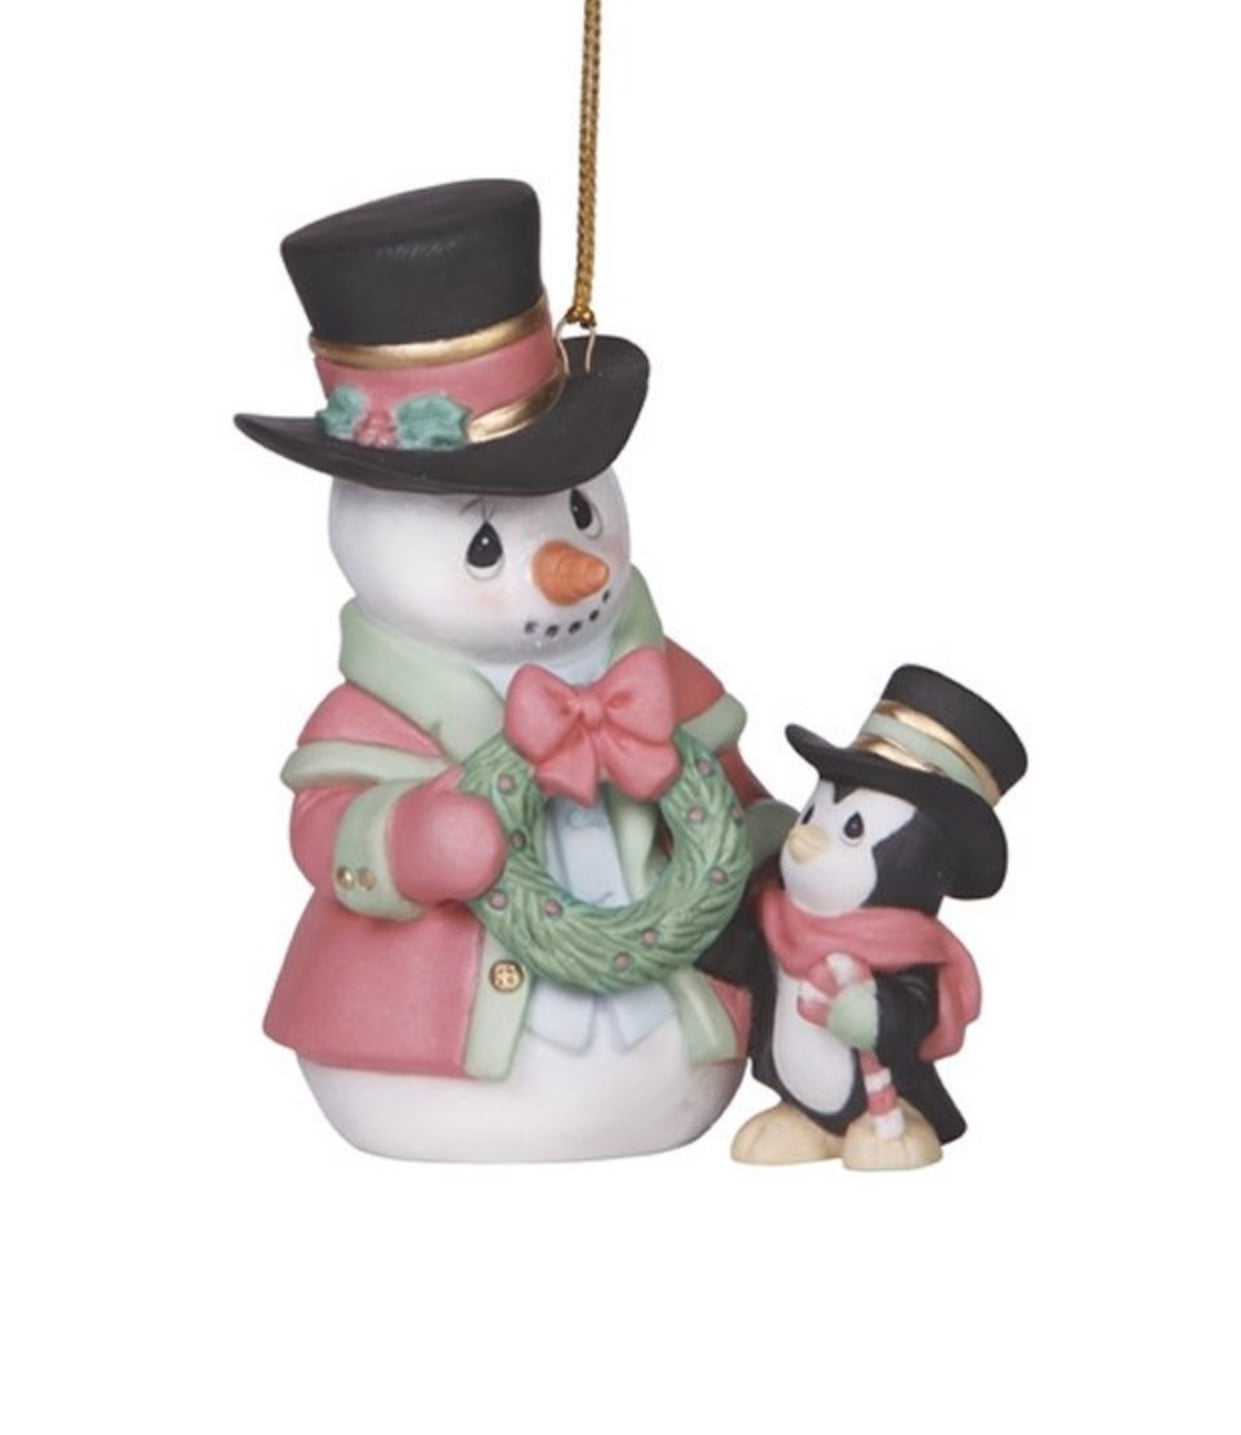 All Decked Out For The Holidays - Precious Moment Ornament